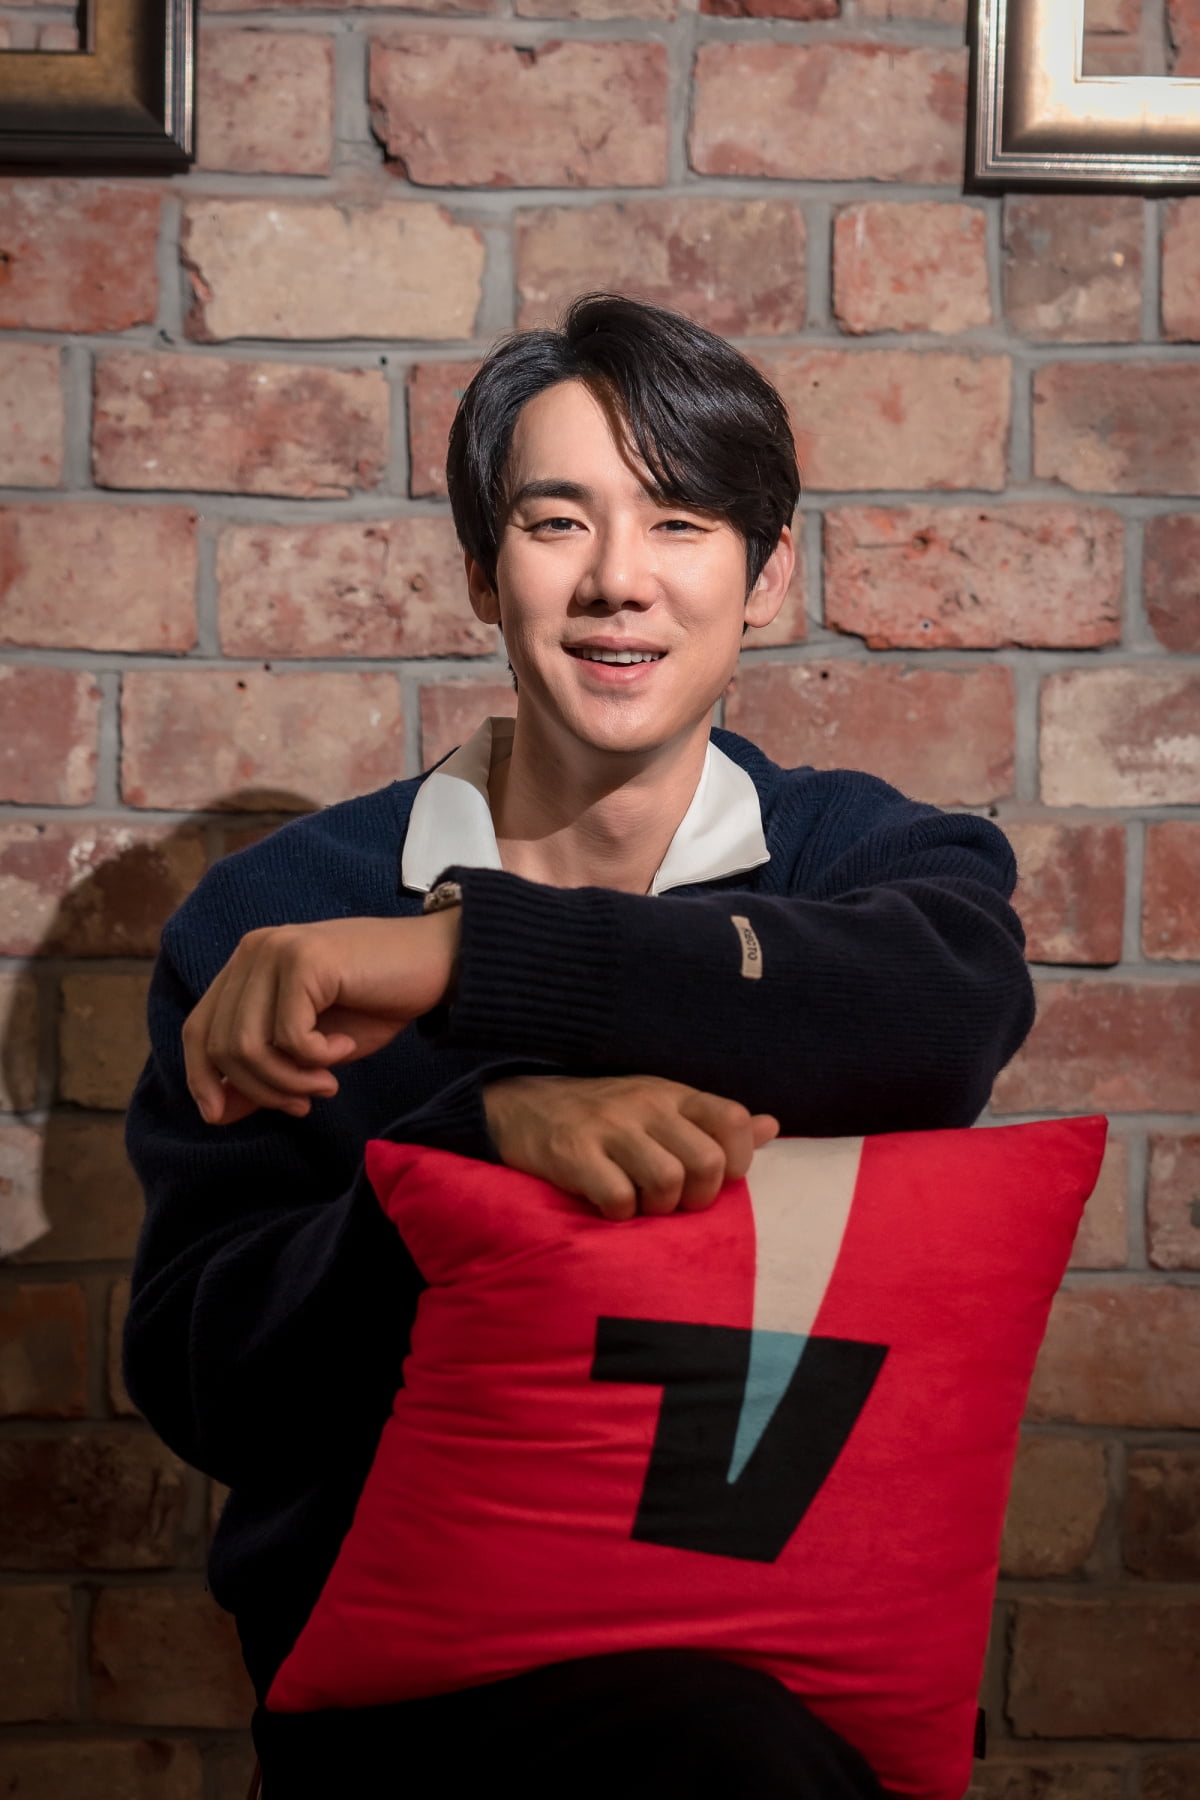 Yoo Yeon-seok ad-libbed 'V' on the black box after the murder, "I want to enjoy this situation"